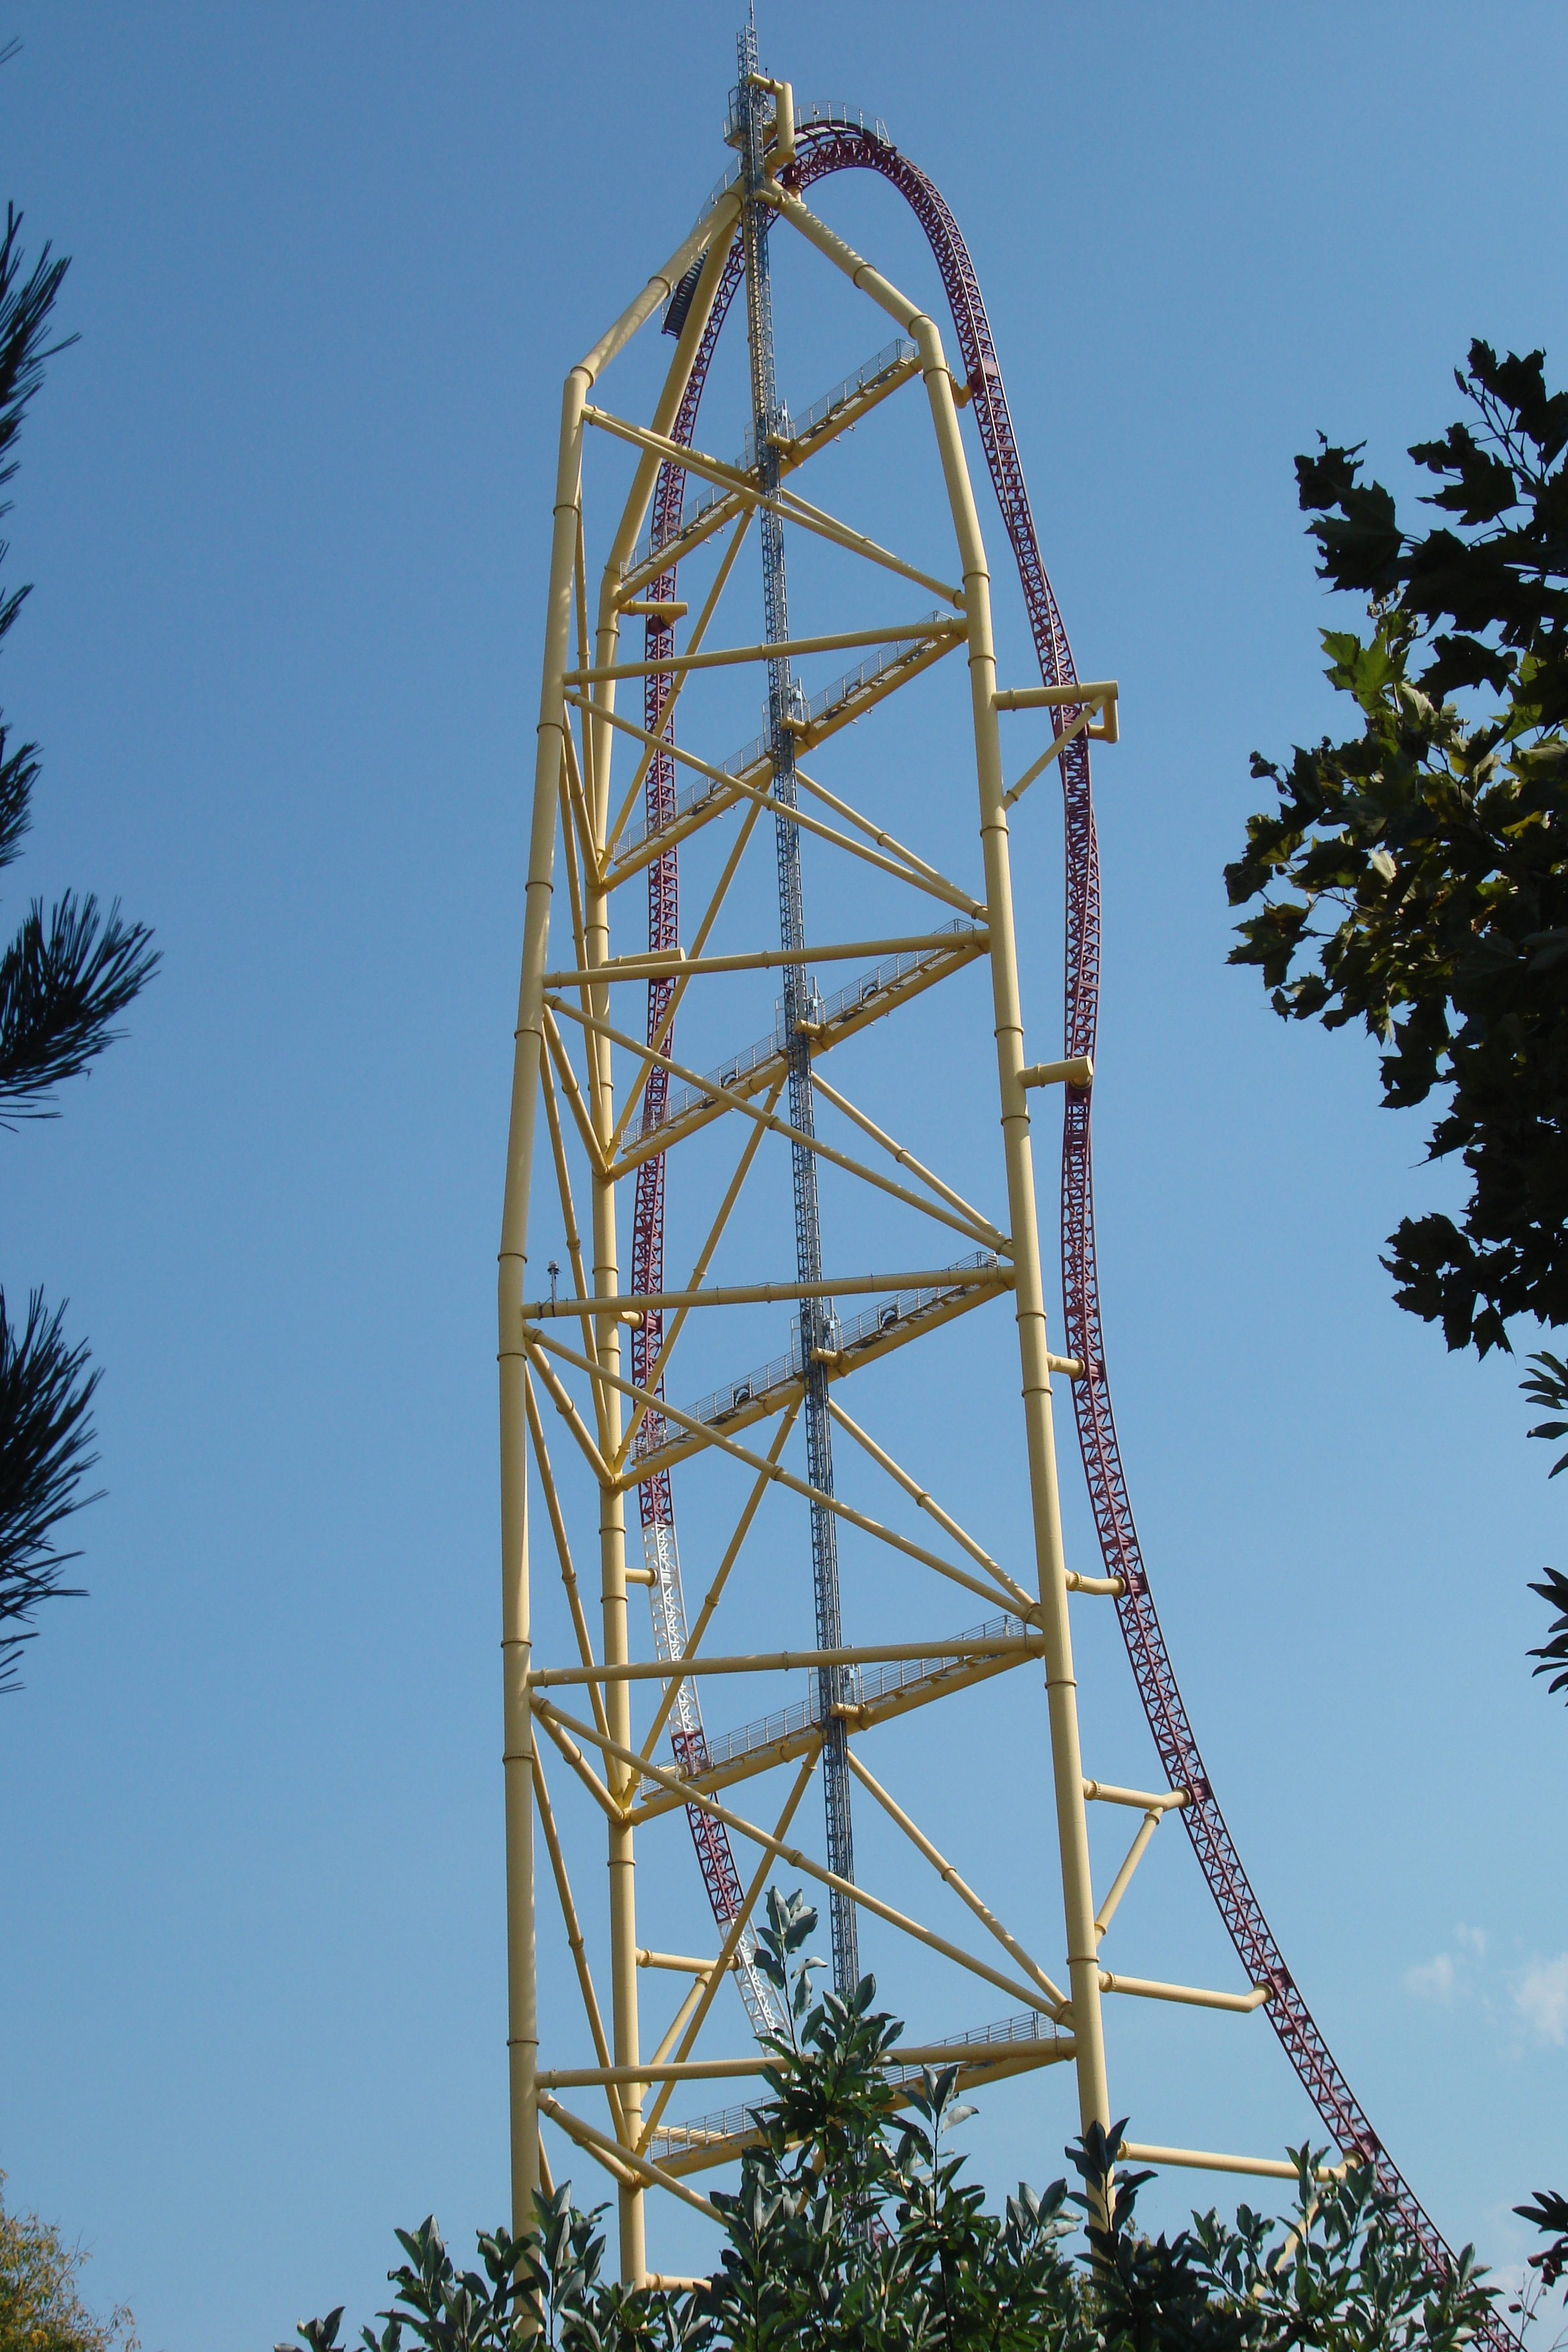 File:Top Thrill Dragster (Cedar Point) 01.jpg - Wikipedia, the free encyclopedia